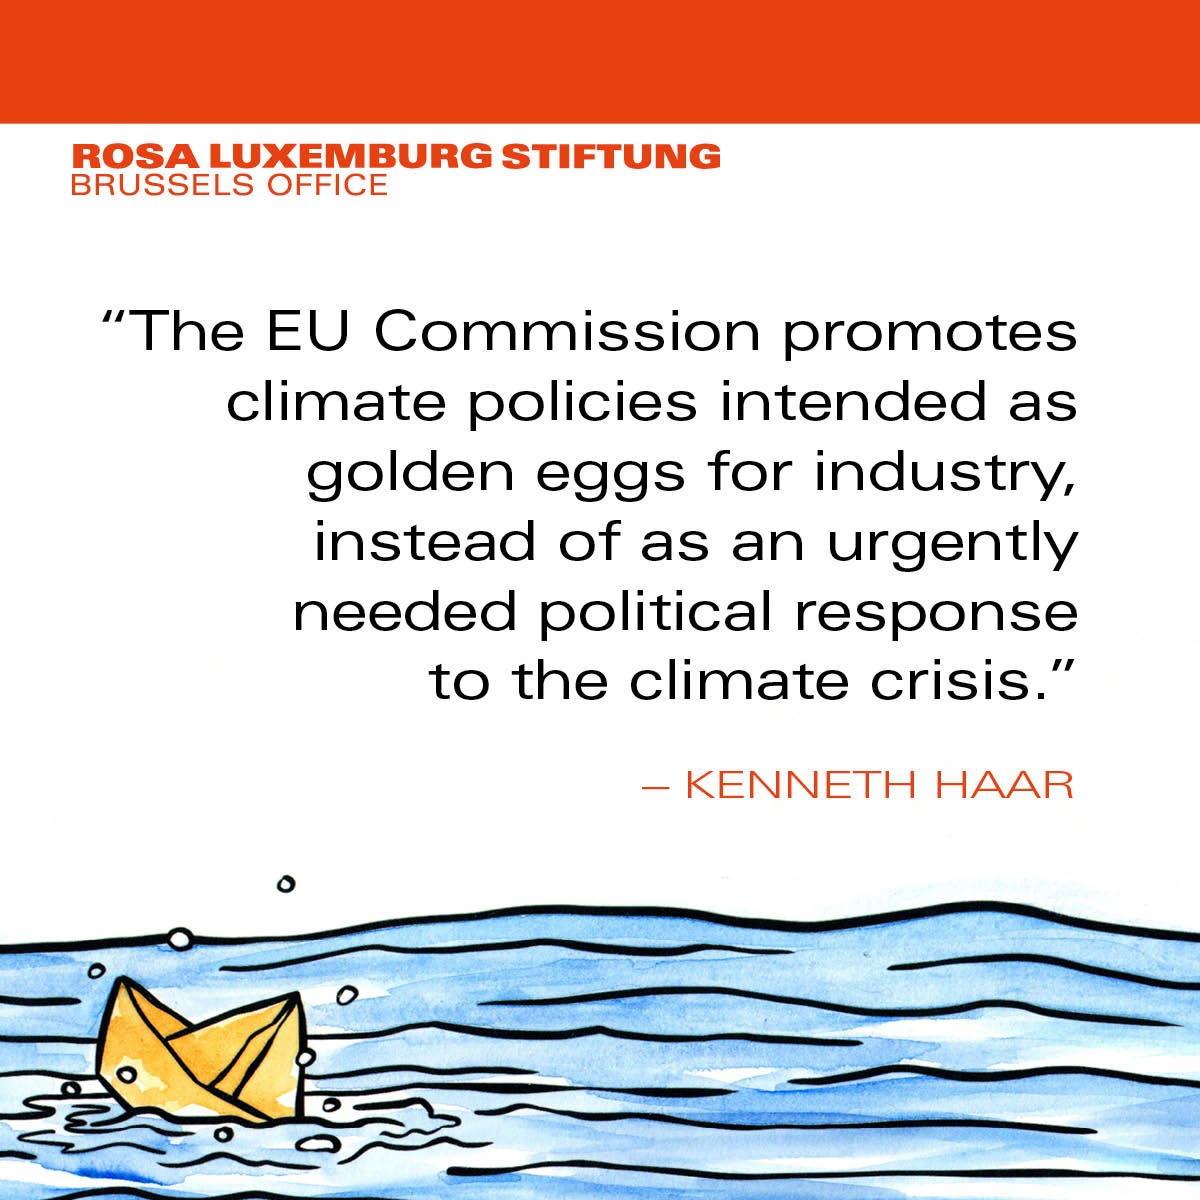 Climate policies as golden eggs for industry?🐣 @KennethHaar’s “A Europe of Capital” sheds light on the drivers behind the EU Commission's commitment to a #GreenTransition. 🥂🗓️Join us for the book launch on 17 April: rosalux.eu/en/topic/23.ev…